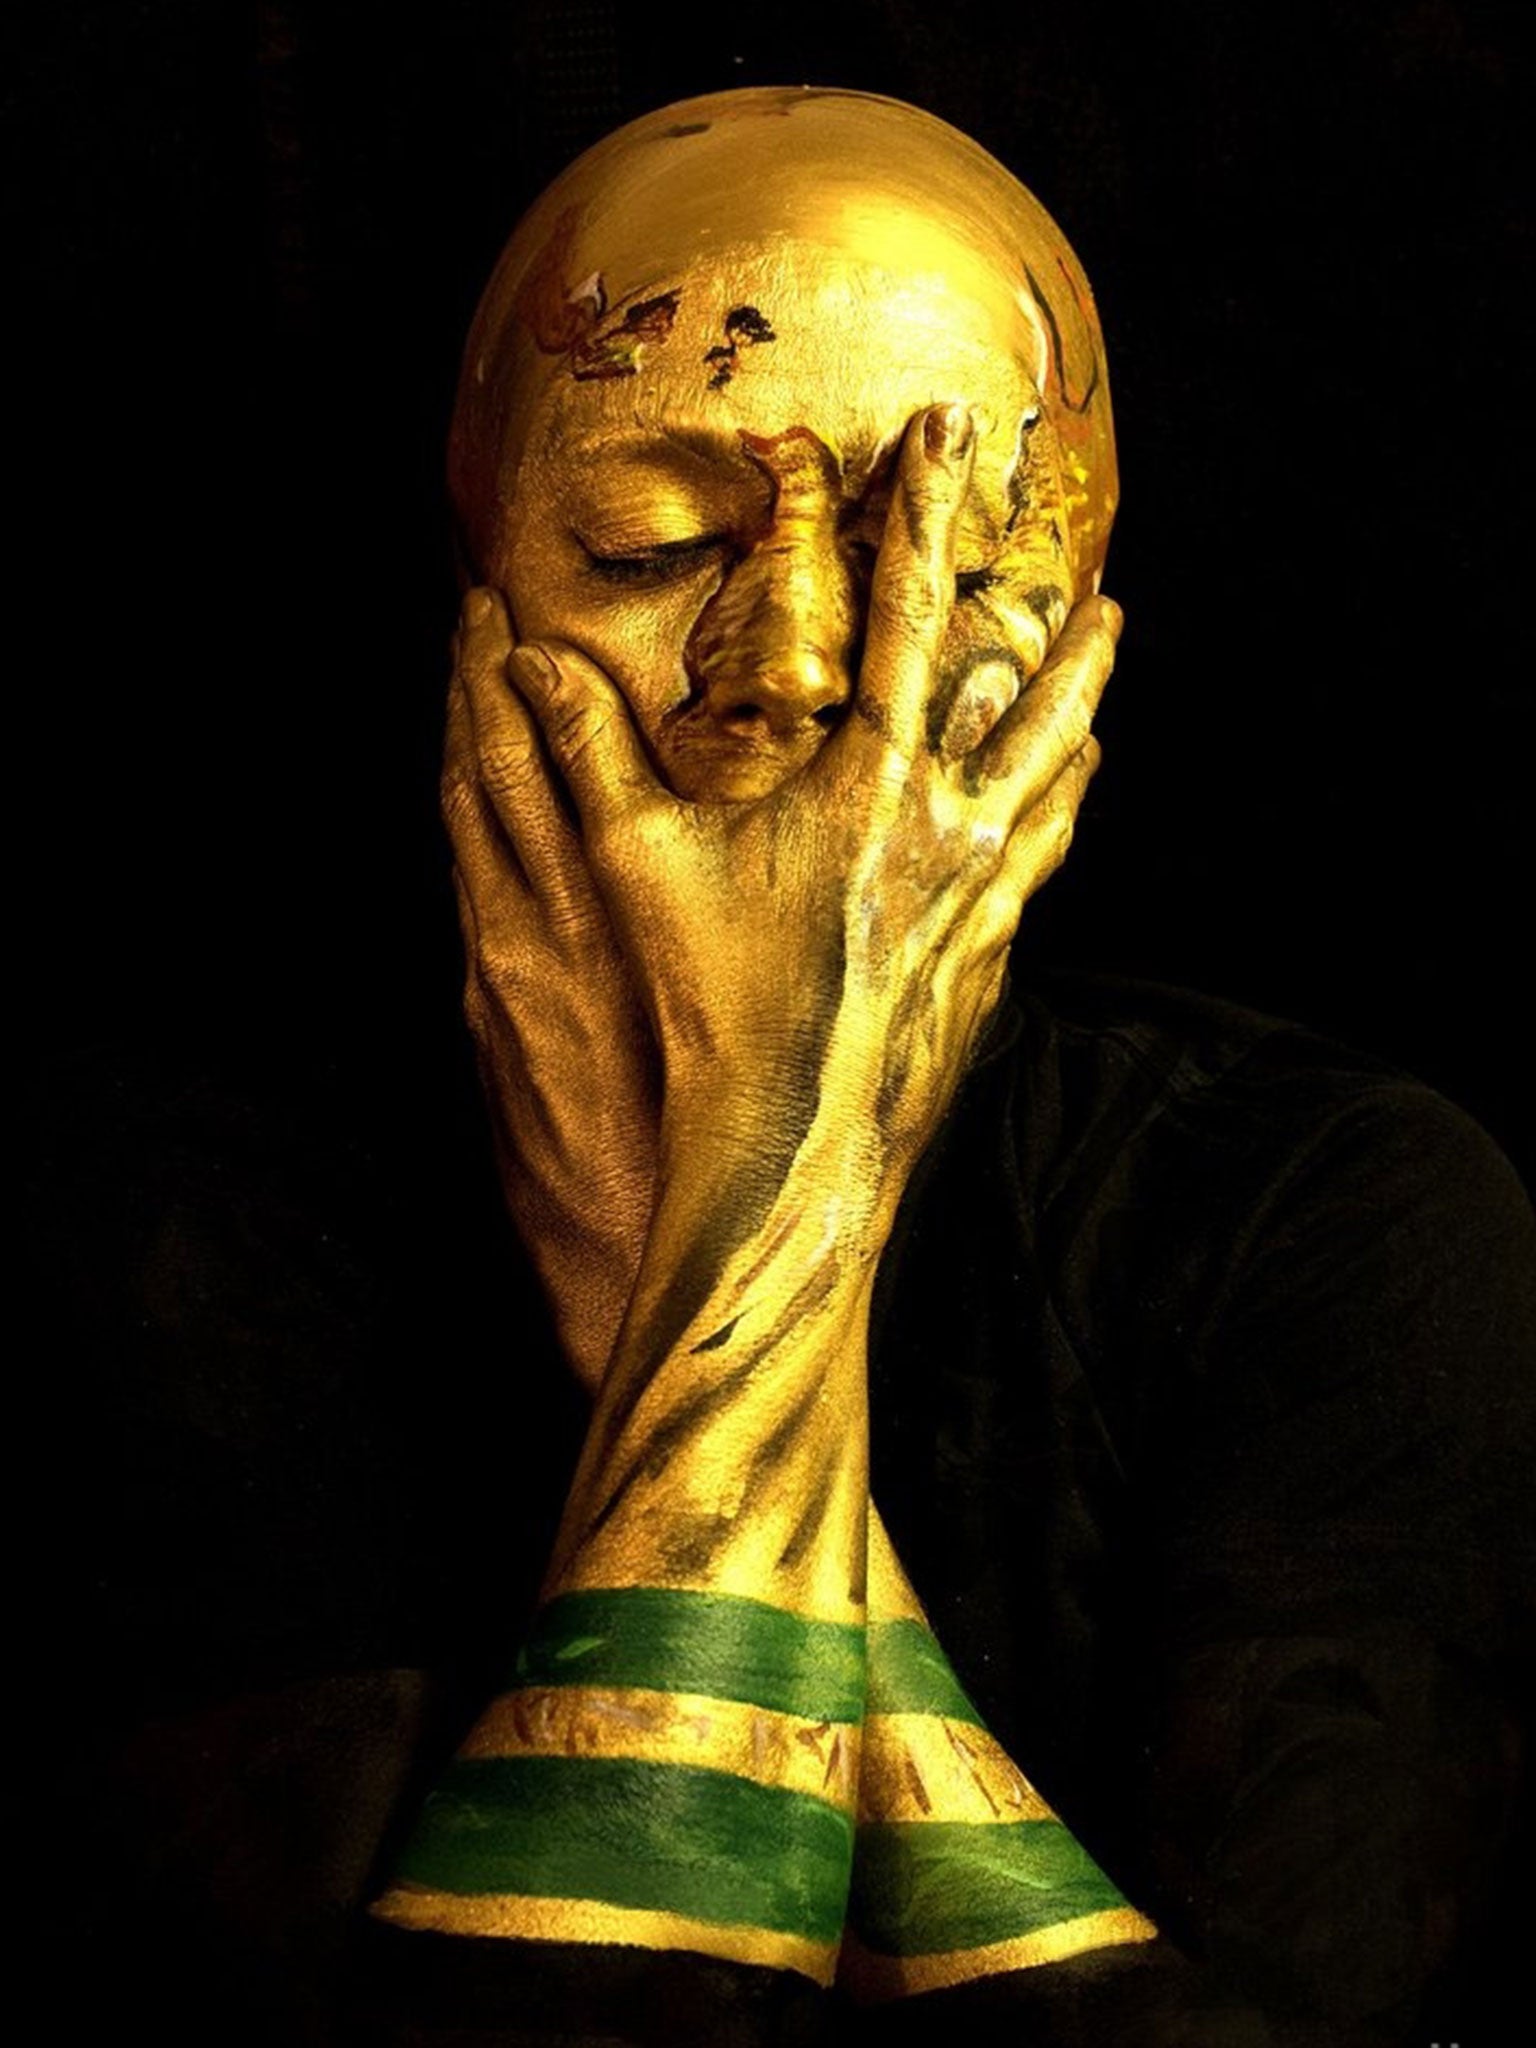 London artist Emma Allen has painted herself as the World Cup